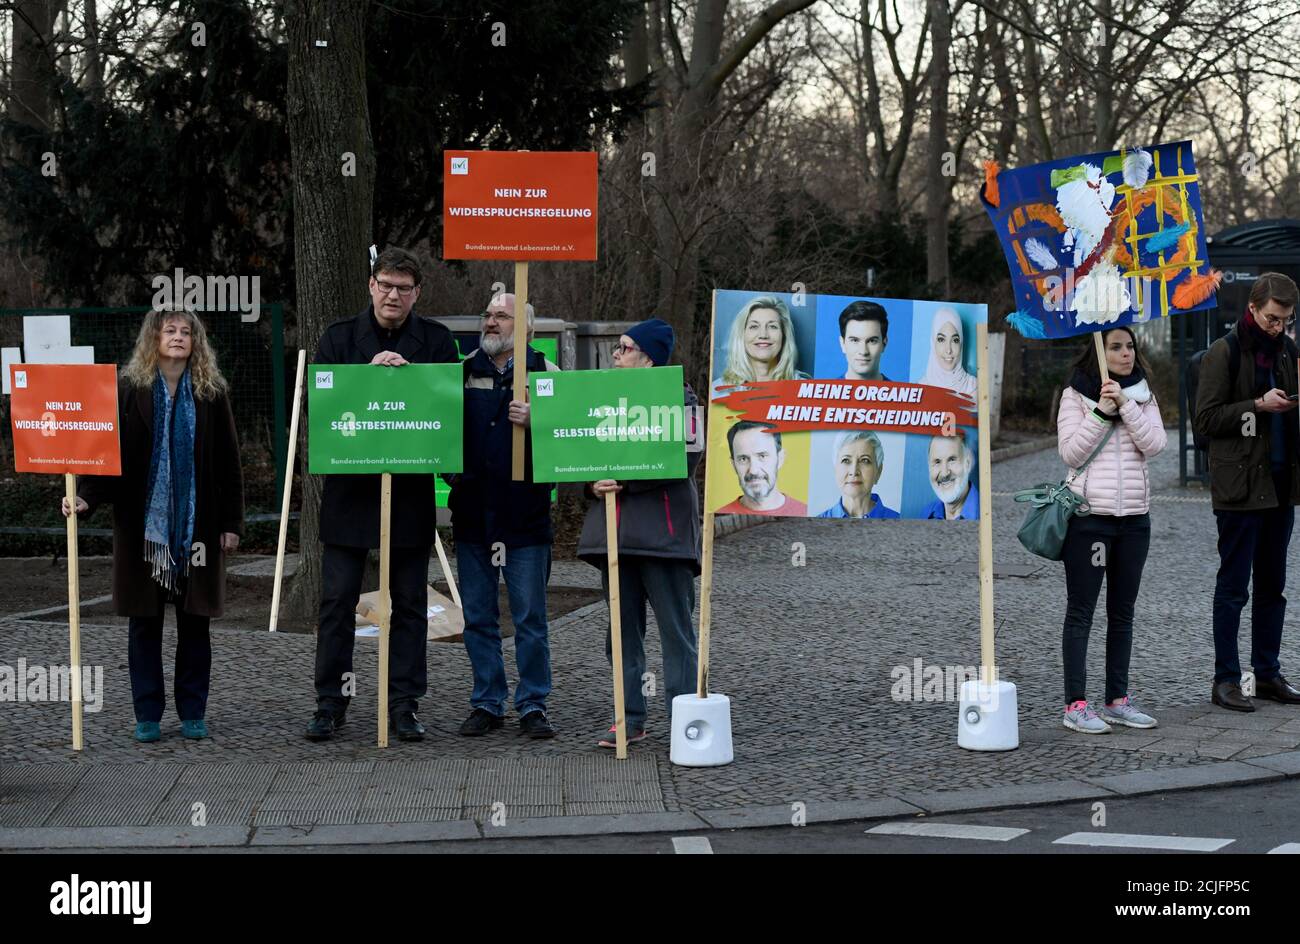 Members of the federal association Right to Life (Bundesverband Lebensrecht e.V.) gather for a protest against the bills to change the legal basis for organ claims in Berlin, Germany, January 16, 2020.  REUTERS/Annegret Hilse Stock Photo